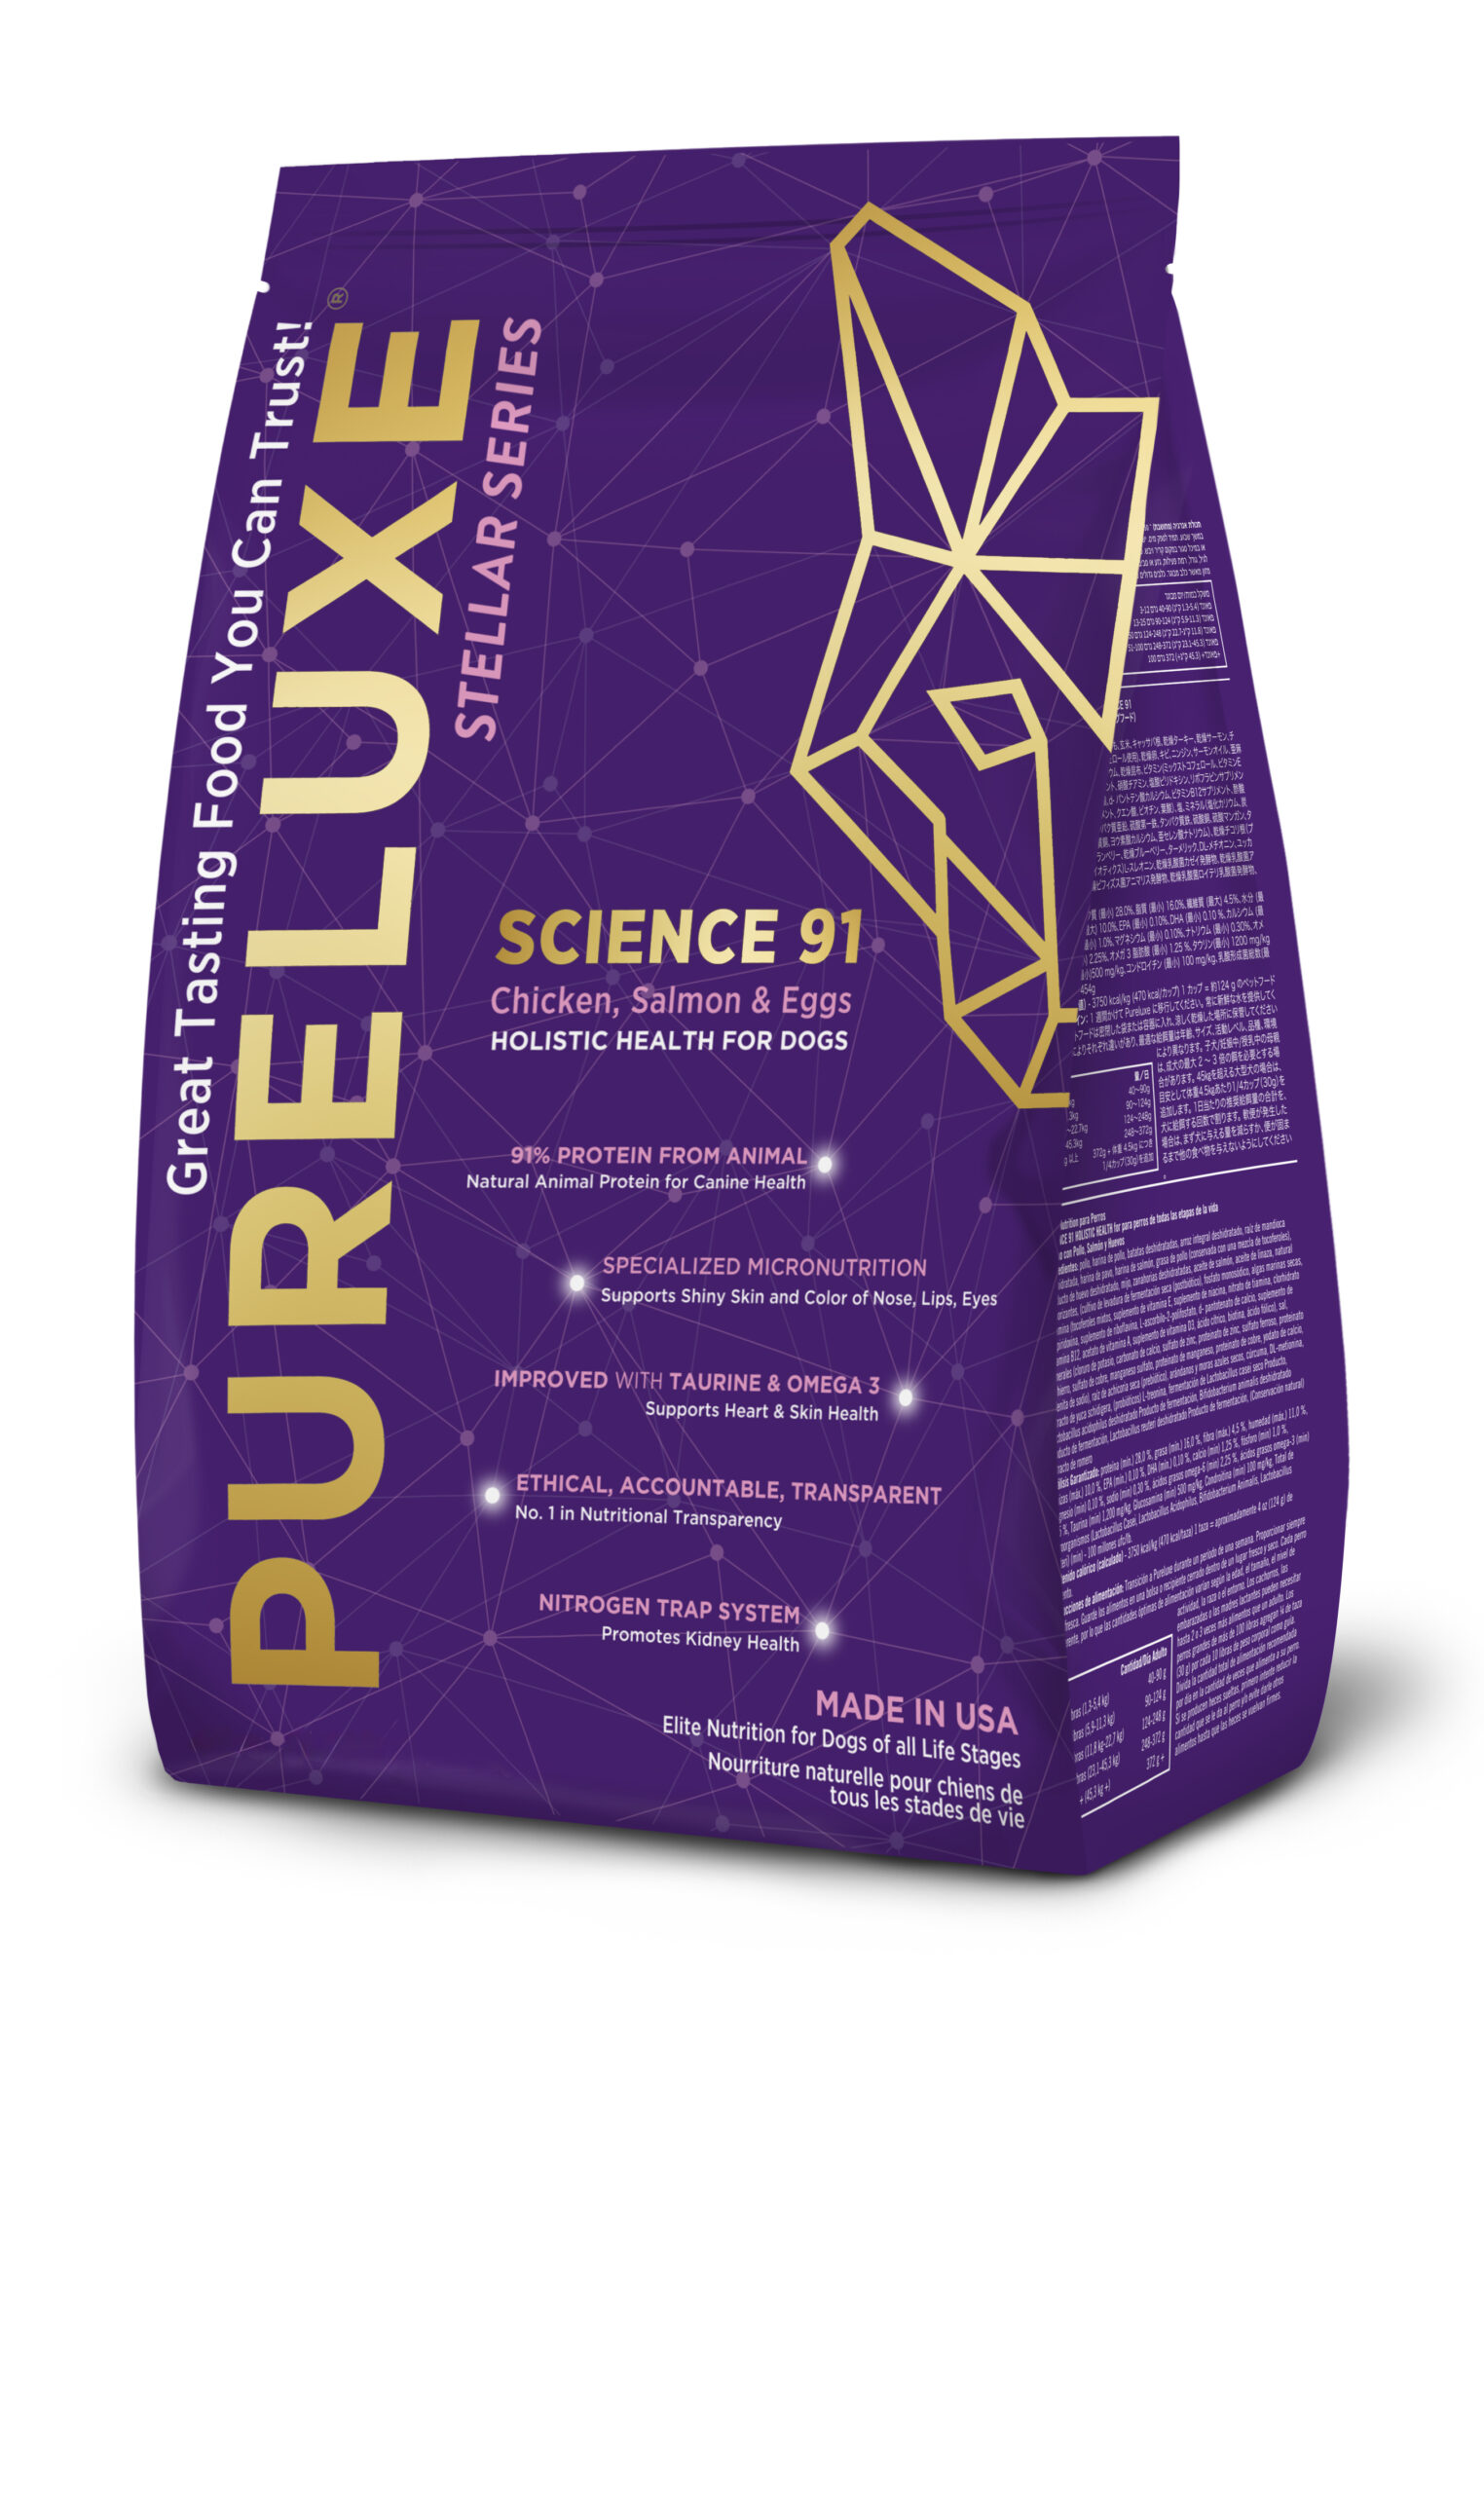 Lick Your Lips All-in-One Pet Nutrition with PureLUXE - Akron Ohio Moms